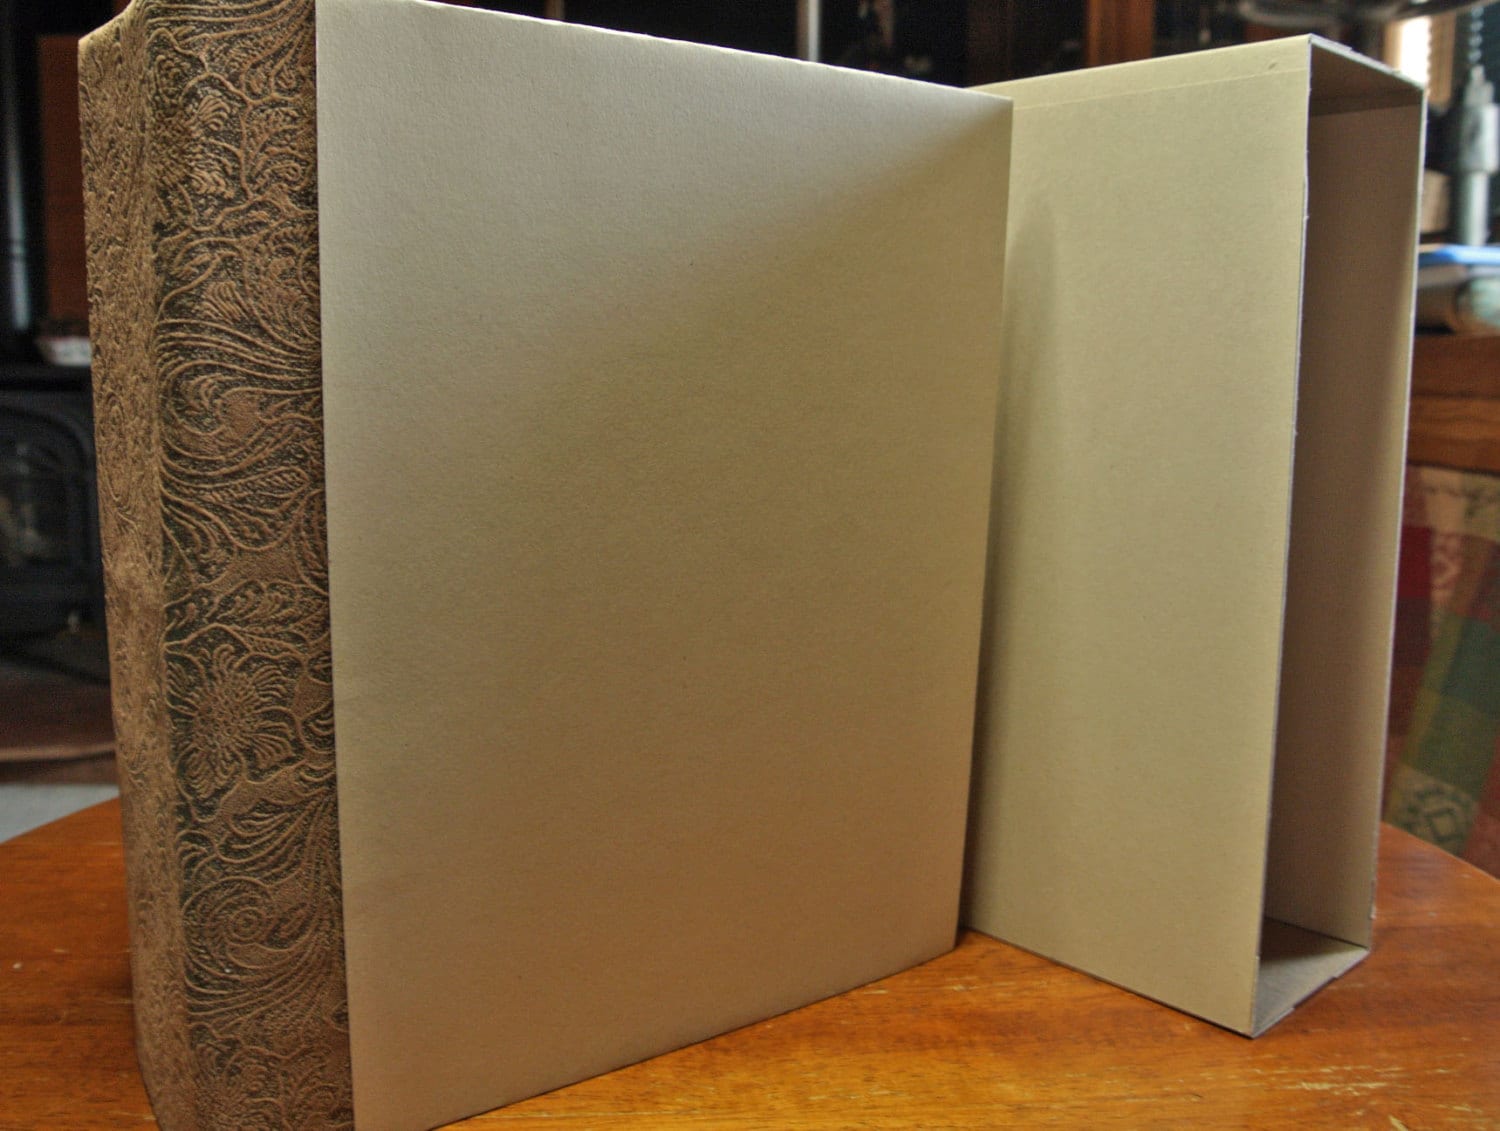  Blank Scrapbook, Long Chipboard Album, Junque Journal, 6 (or  more) Page photo album, 8 3/8 x 4 1/4 (10 Page Album) : Handmade Products